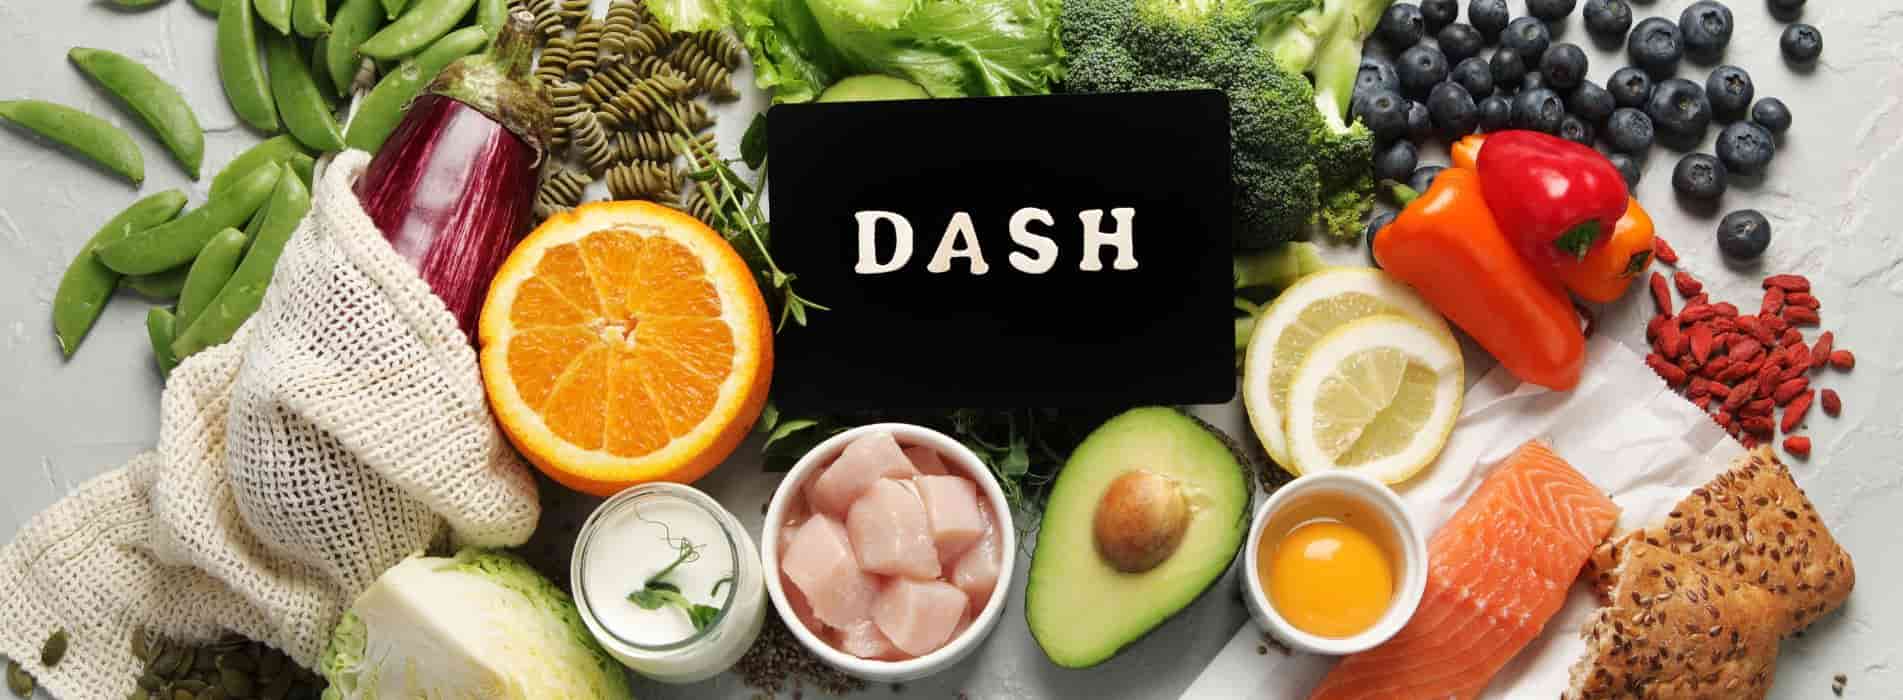 dash diet good for weight loss